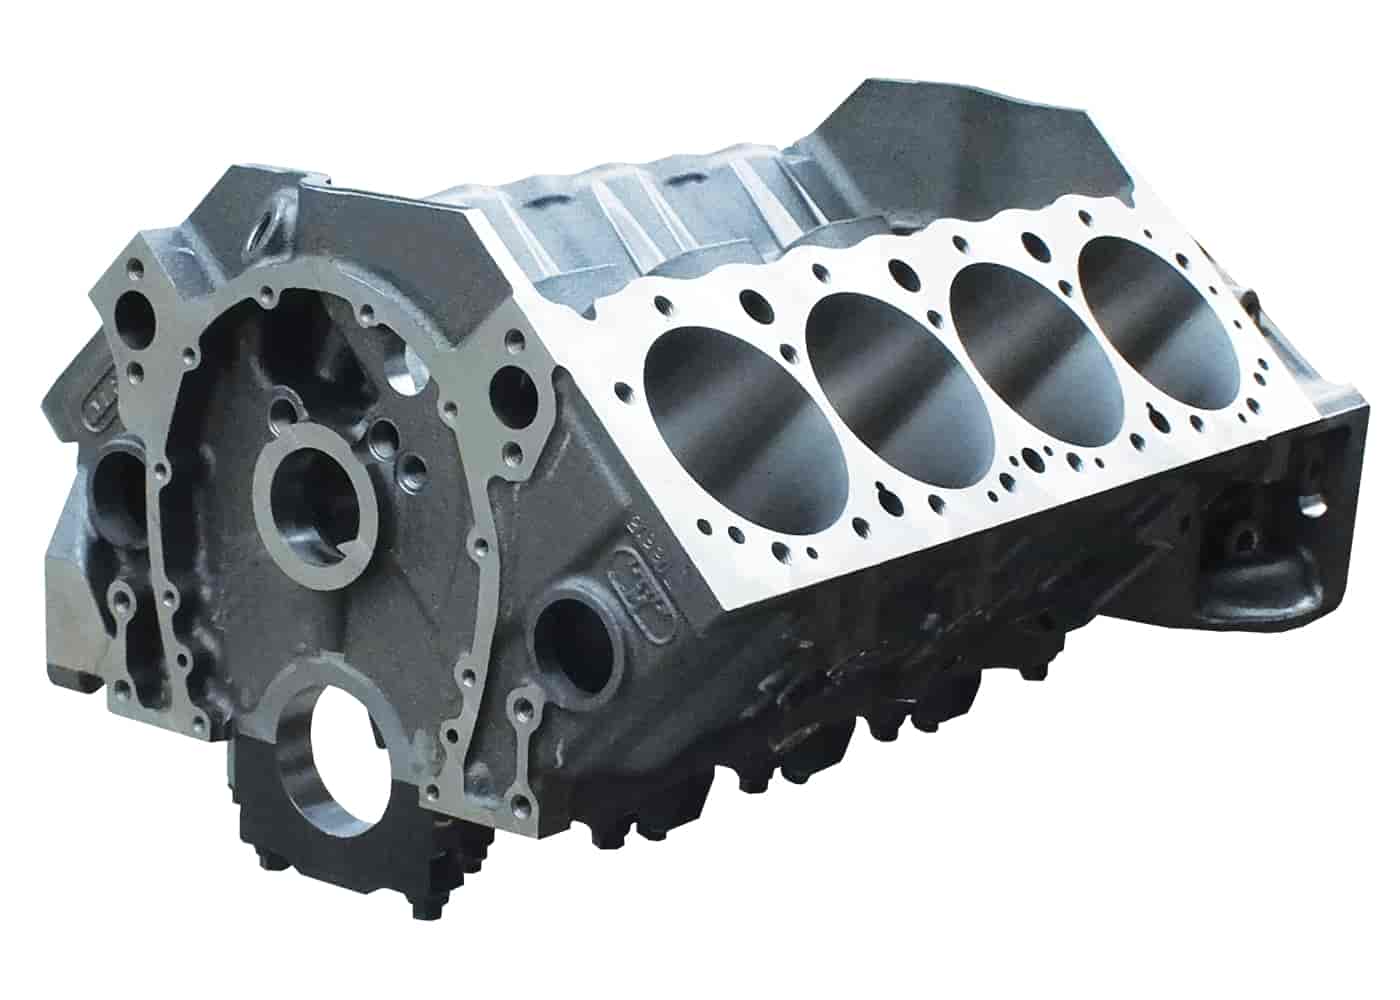 Little M Engine Block Small Block Chevy 9.025 in. Deck, +.391 in. Raised Camshaft